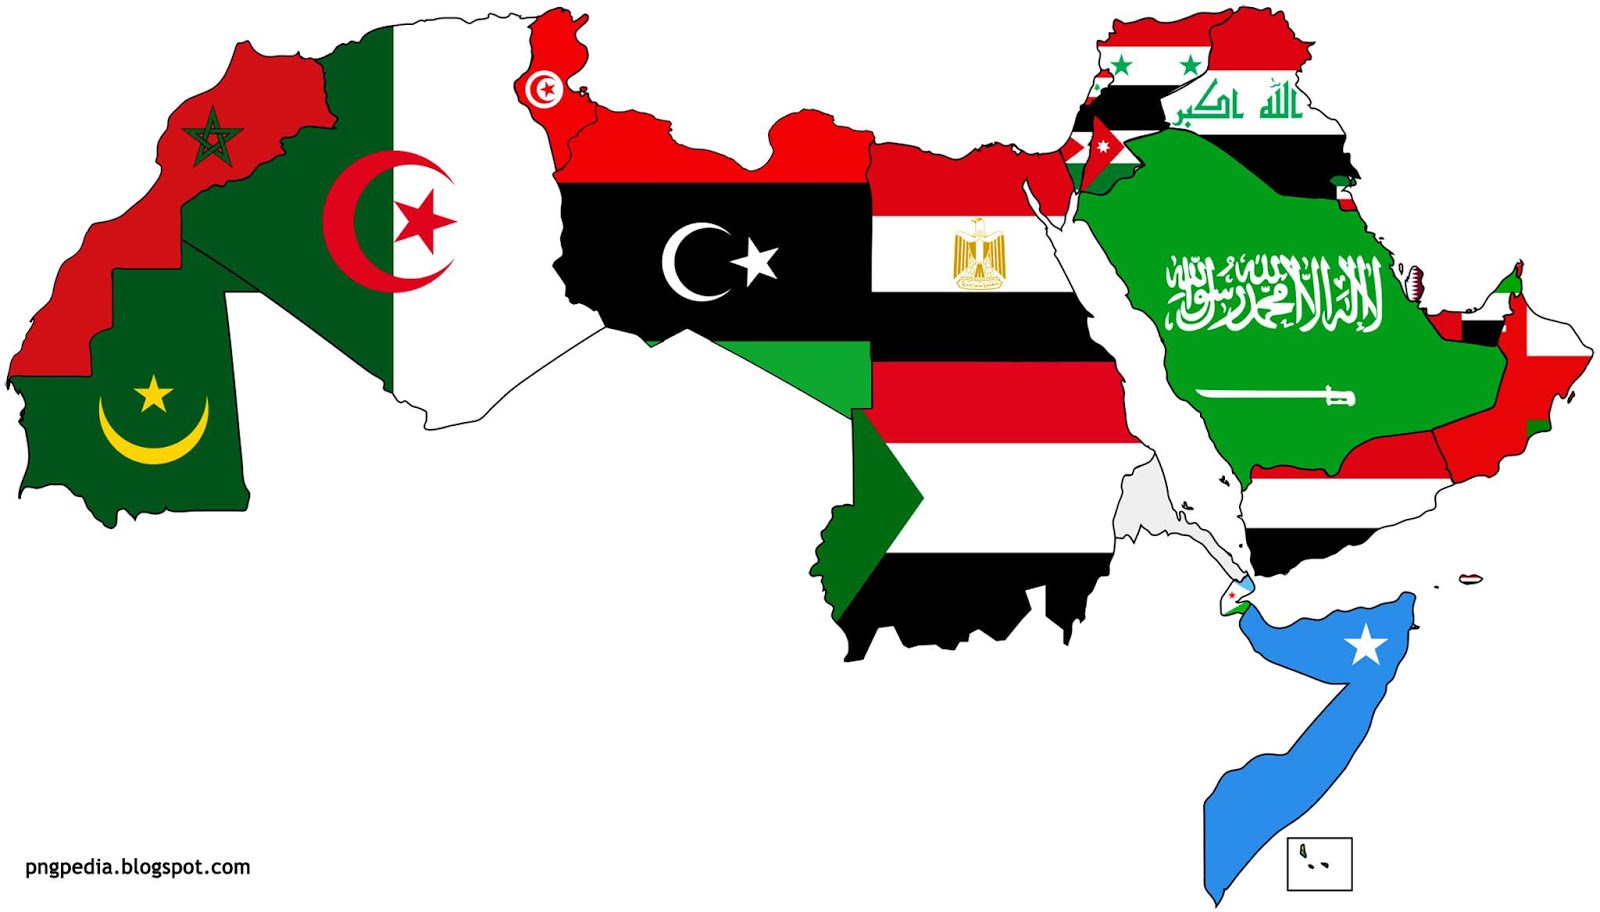 A_map_of_the_Arab_World_with_flags